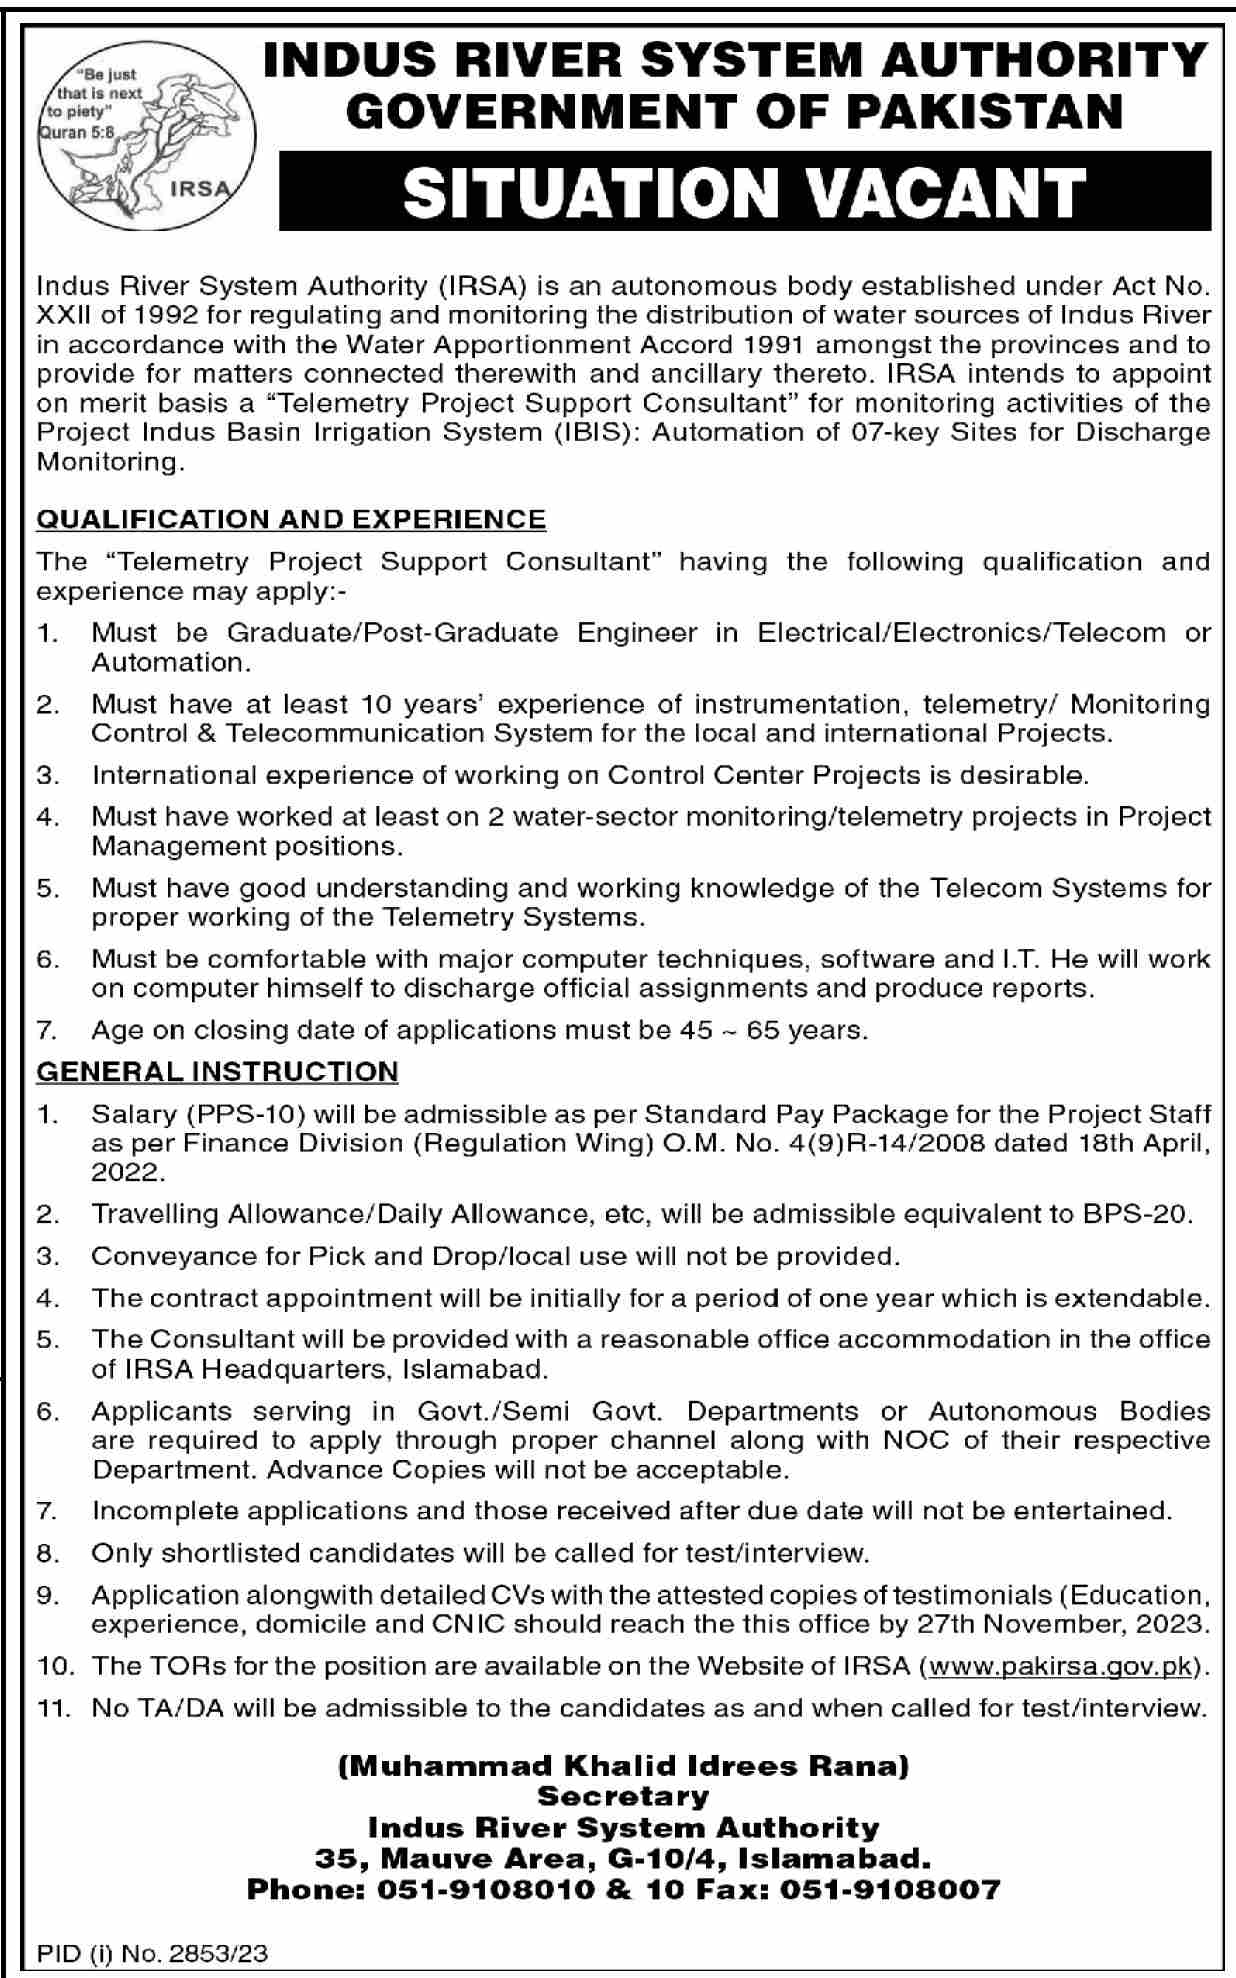 Indus River System Authority Government of Pakistan Jobs